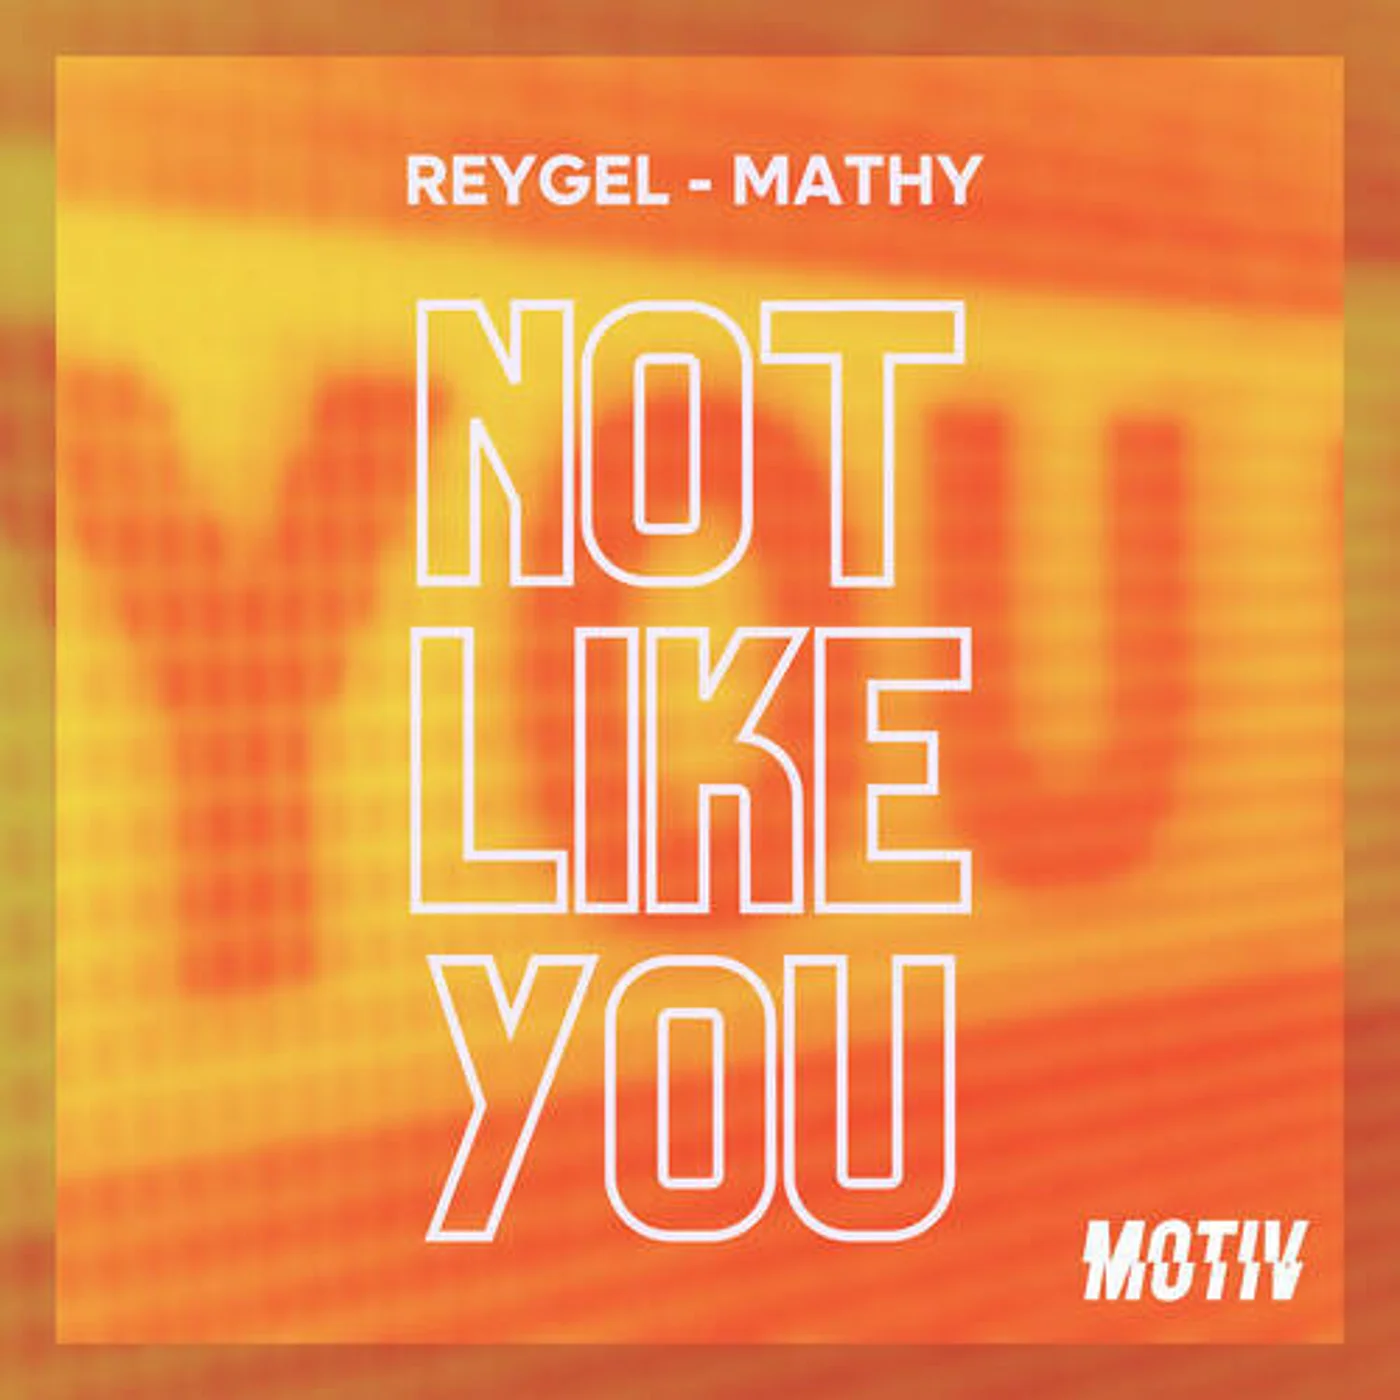 Experience the synergy of two of Belgium's top DJs, Reygel and Mathy